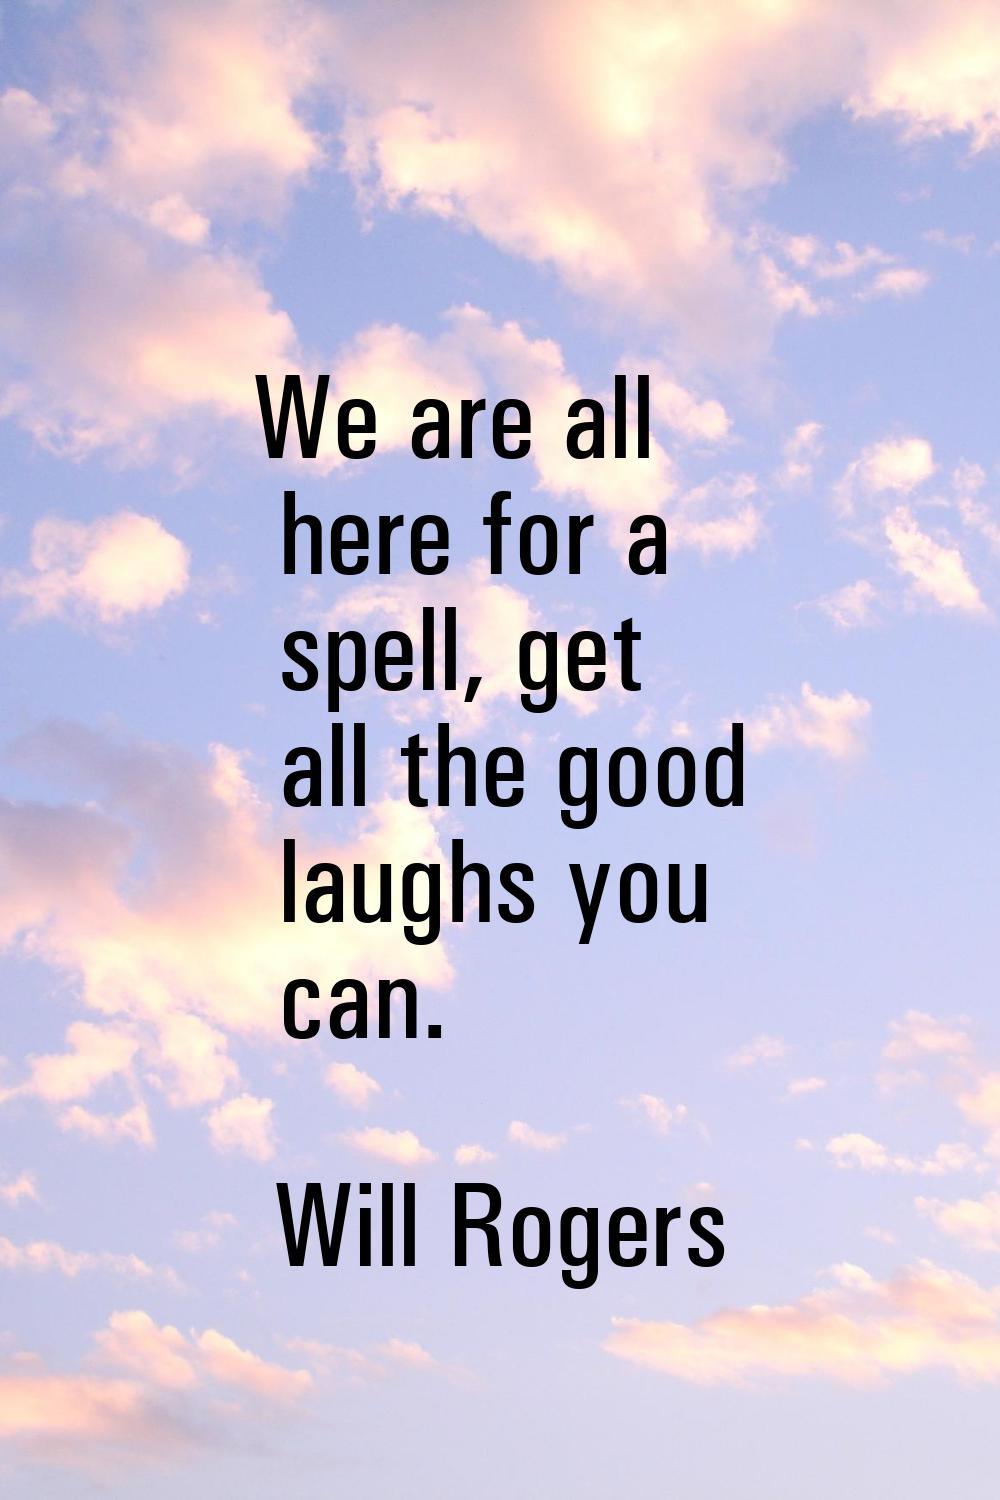 We are all here for a spell, get all the good laughs you can.